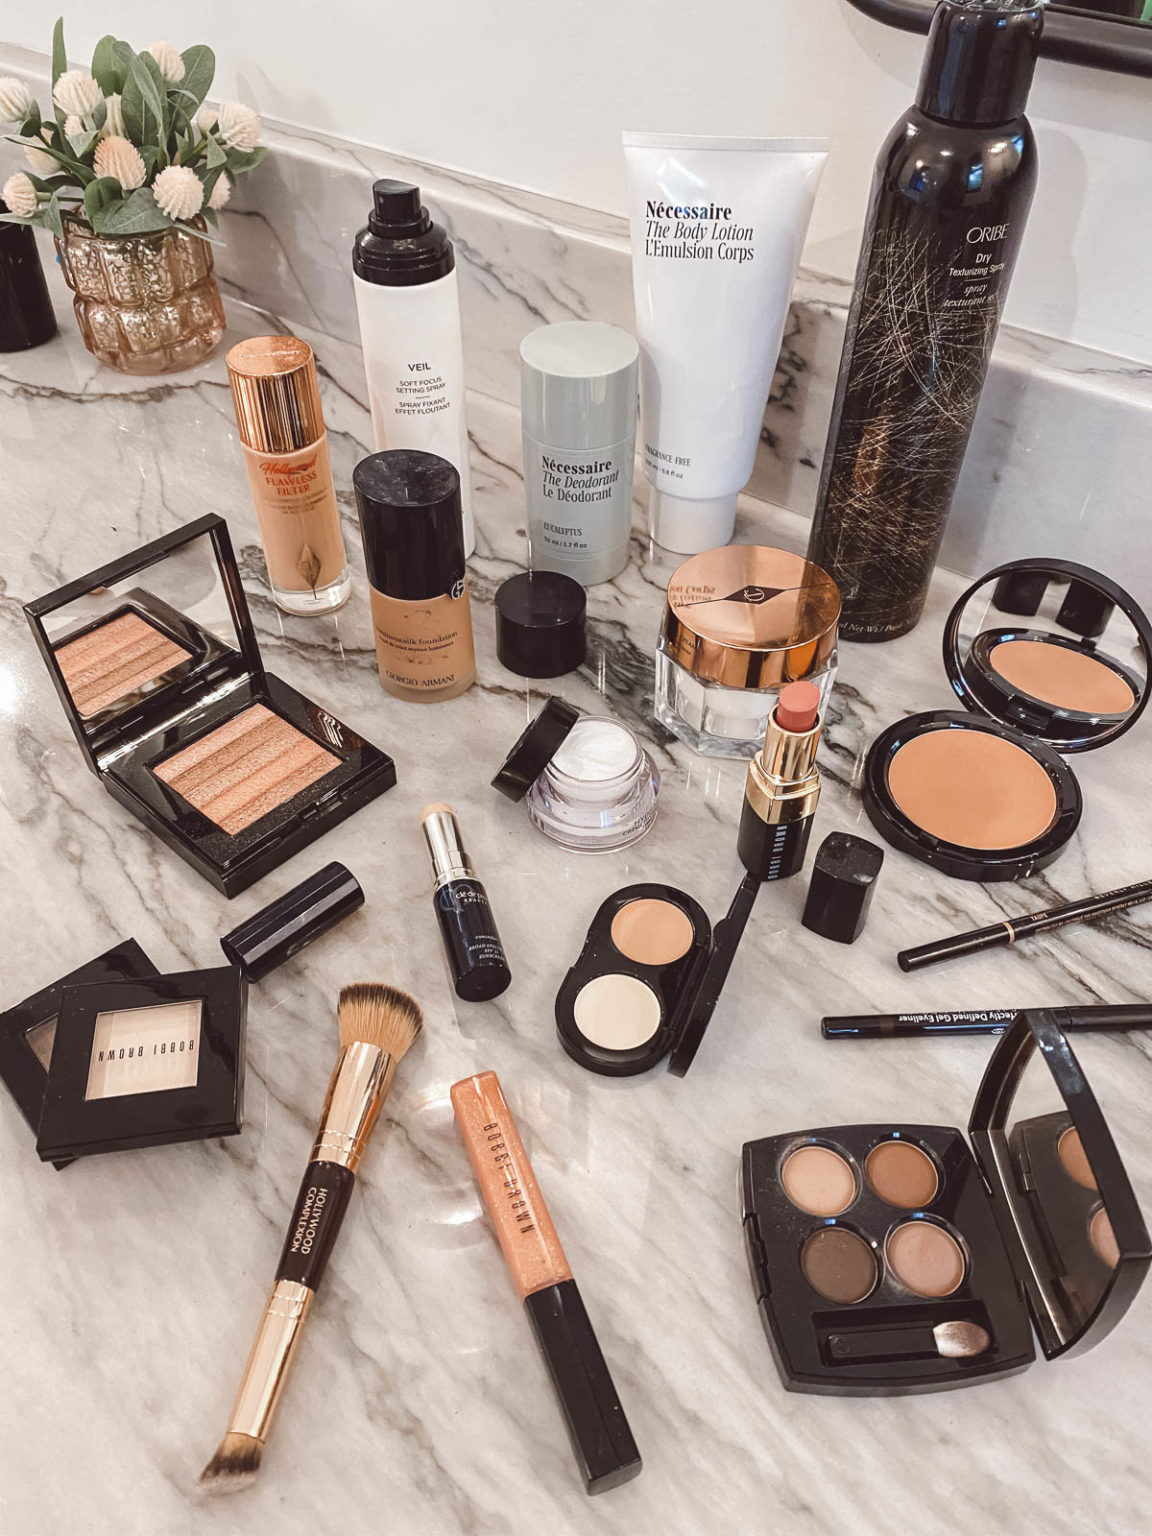 Wedding Day Makeup - The Makeup I Still Love from Bobbi Brown and ...